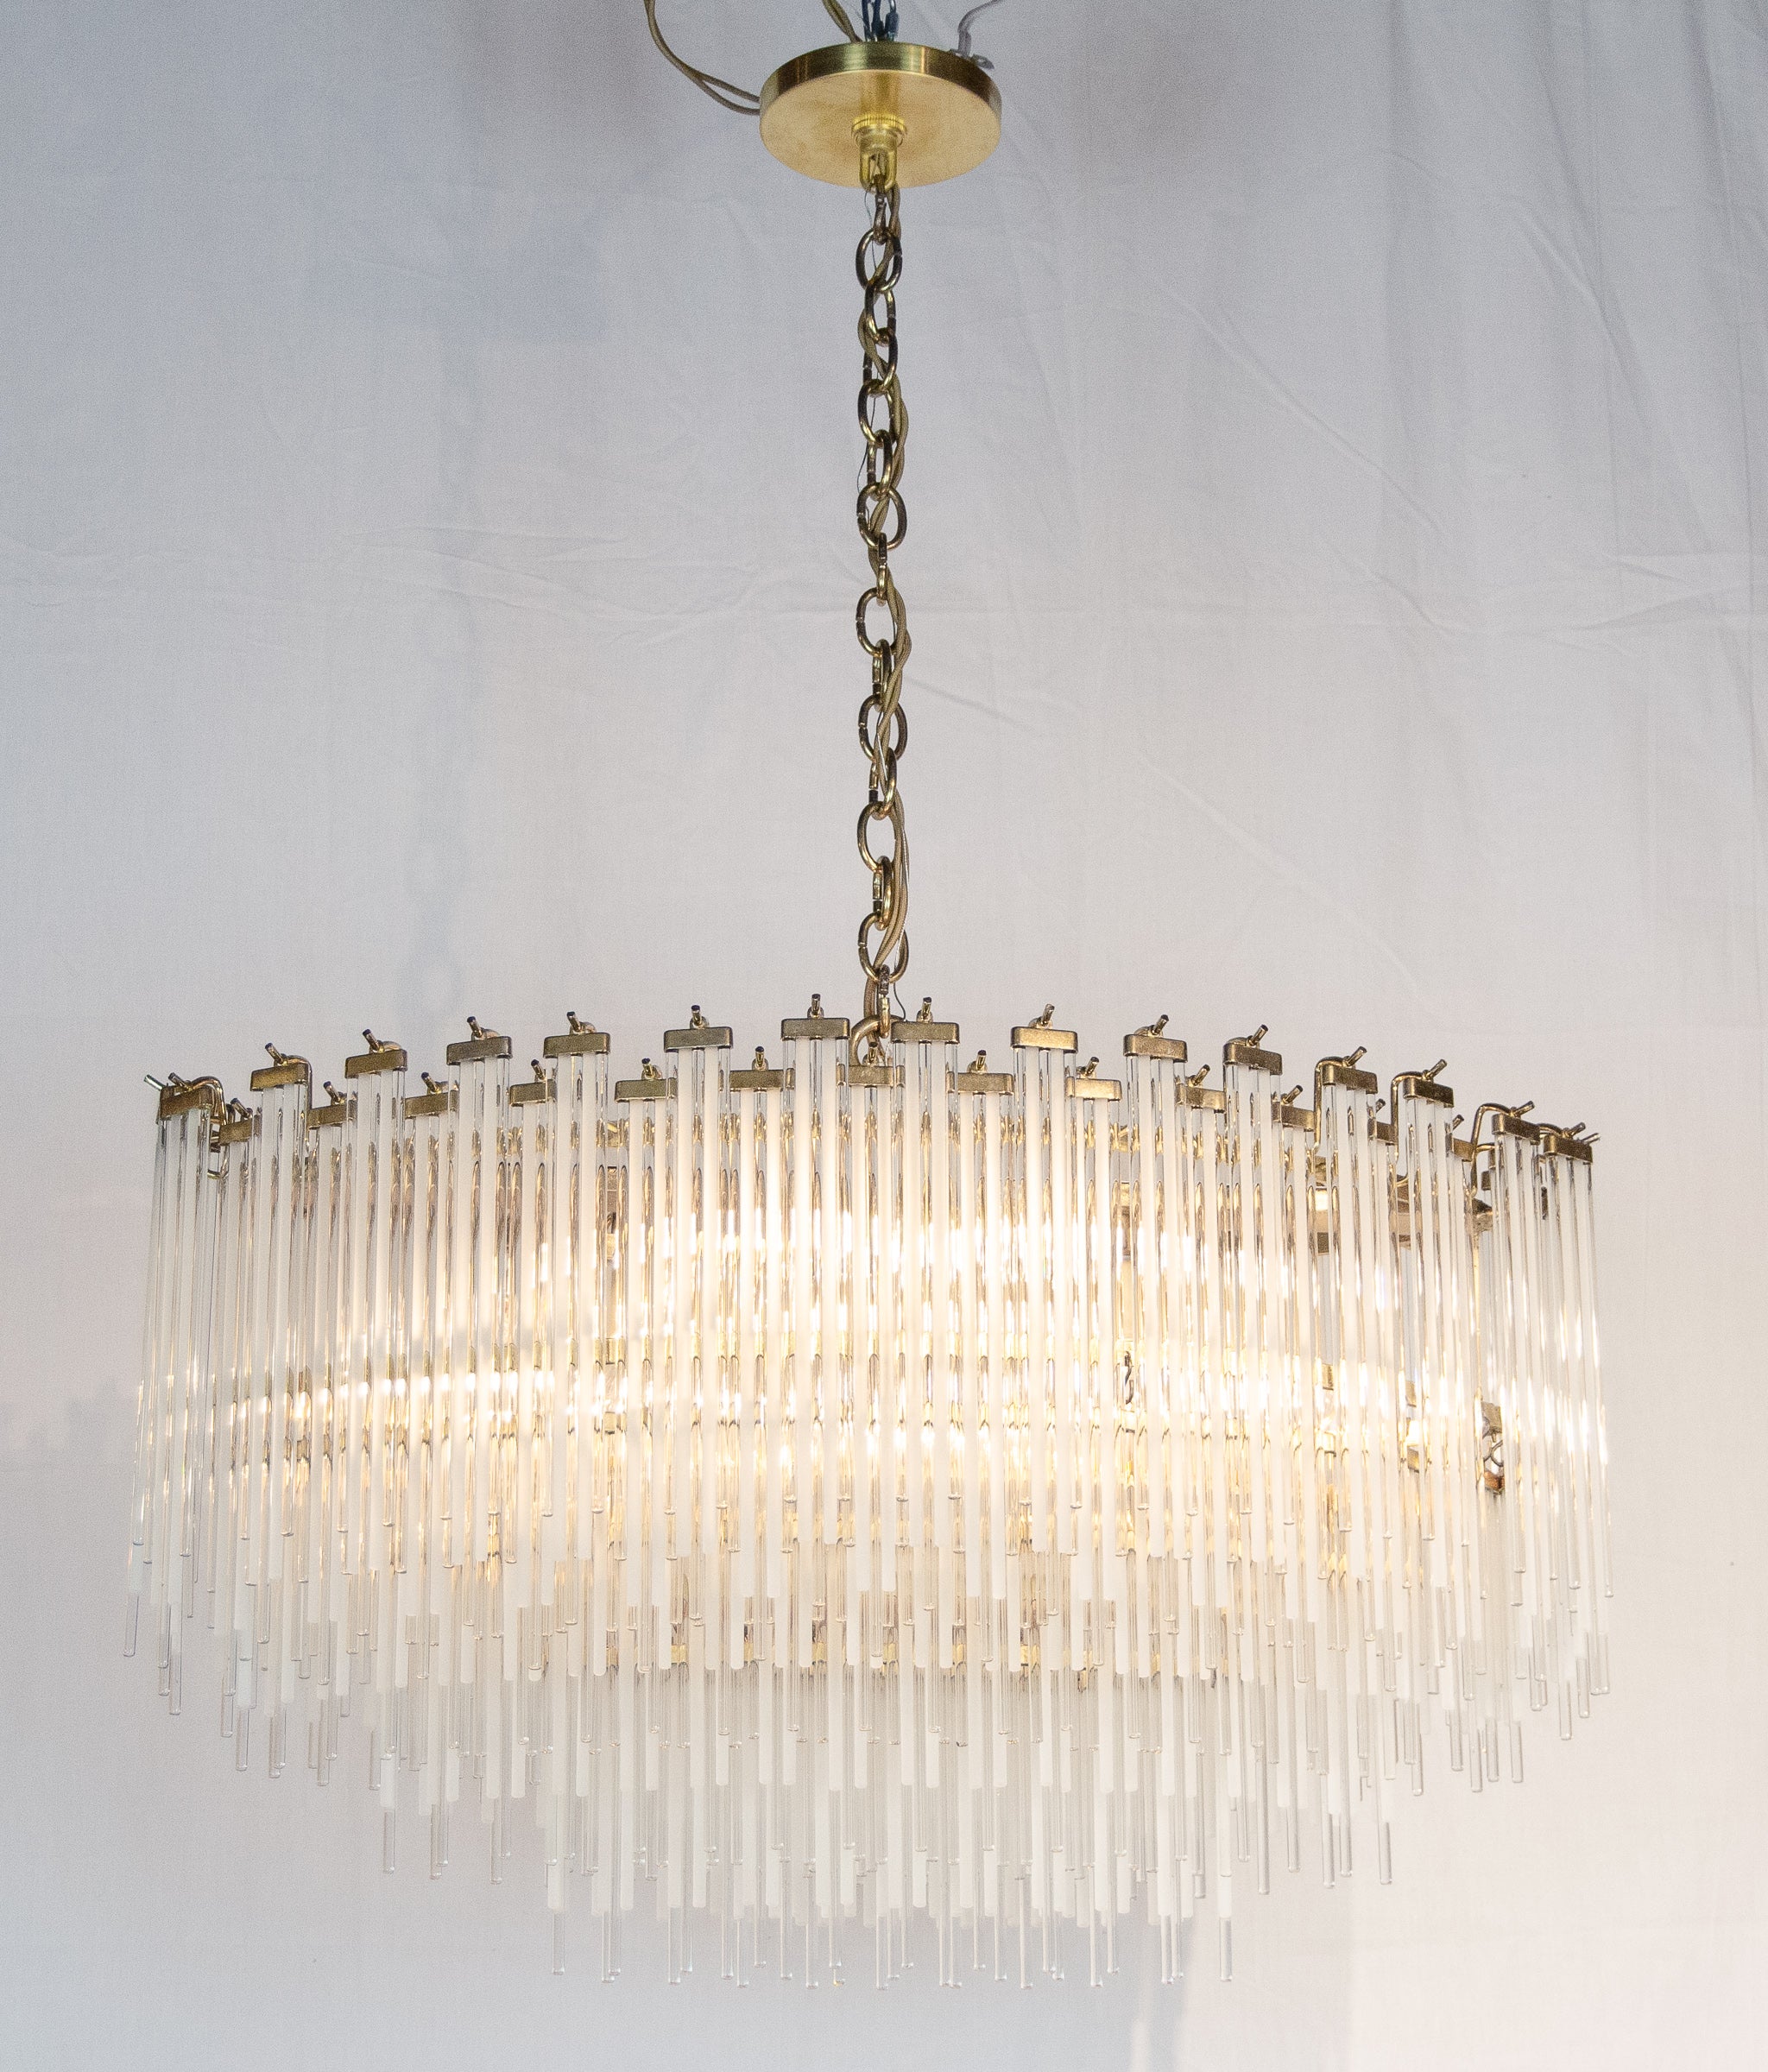 Clear & Frosted Prism Rod Brass Oblong Chandelierin the Manner of Gaetano